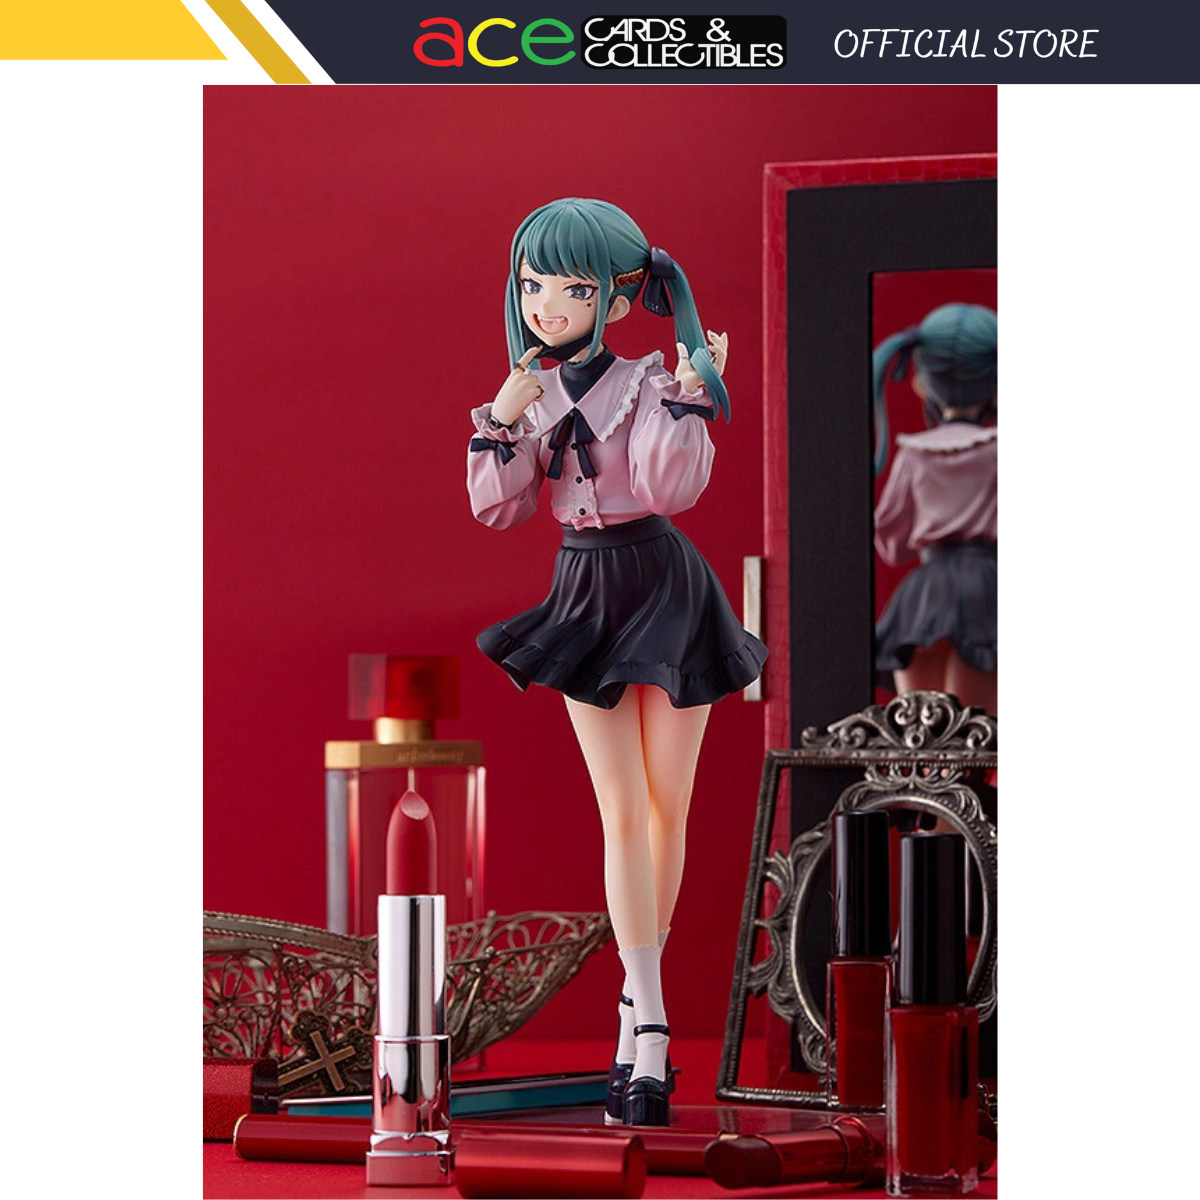 Good Smile Company Tagged Character Vocal Series 01 - Ace Cards